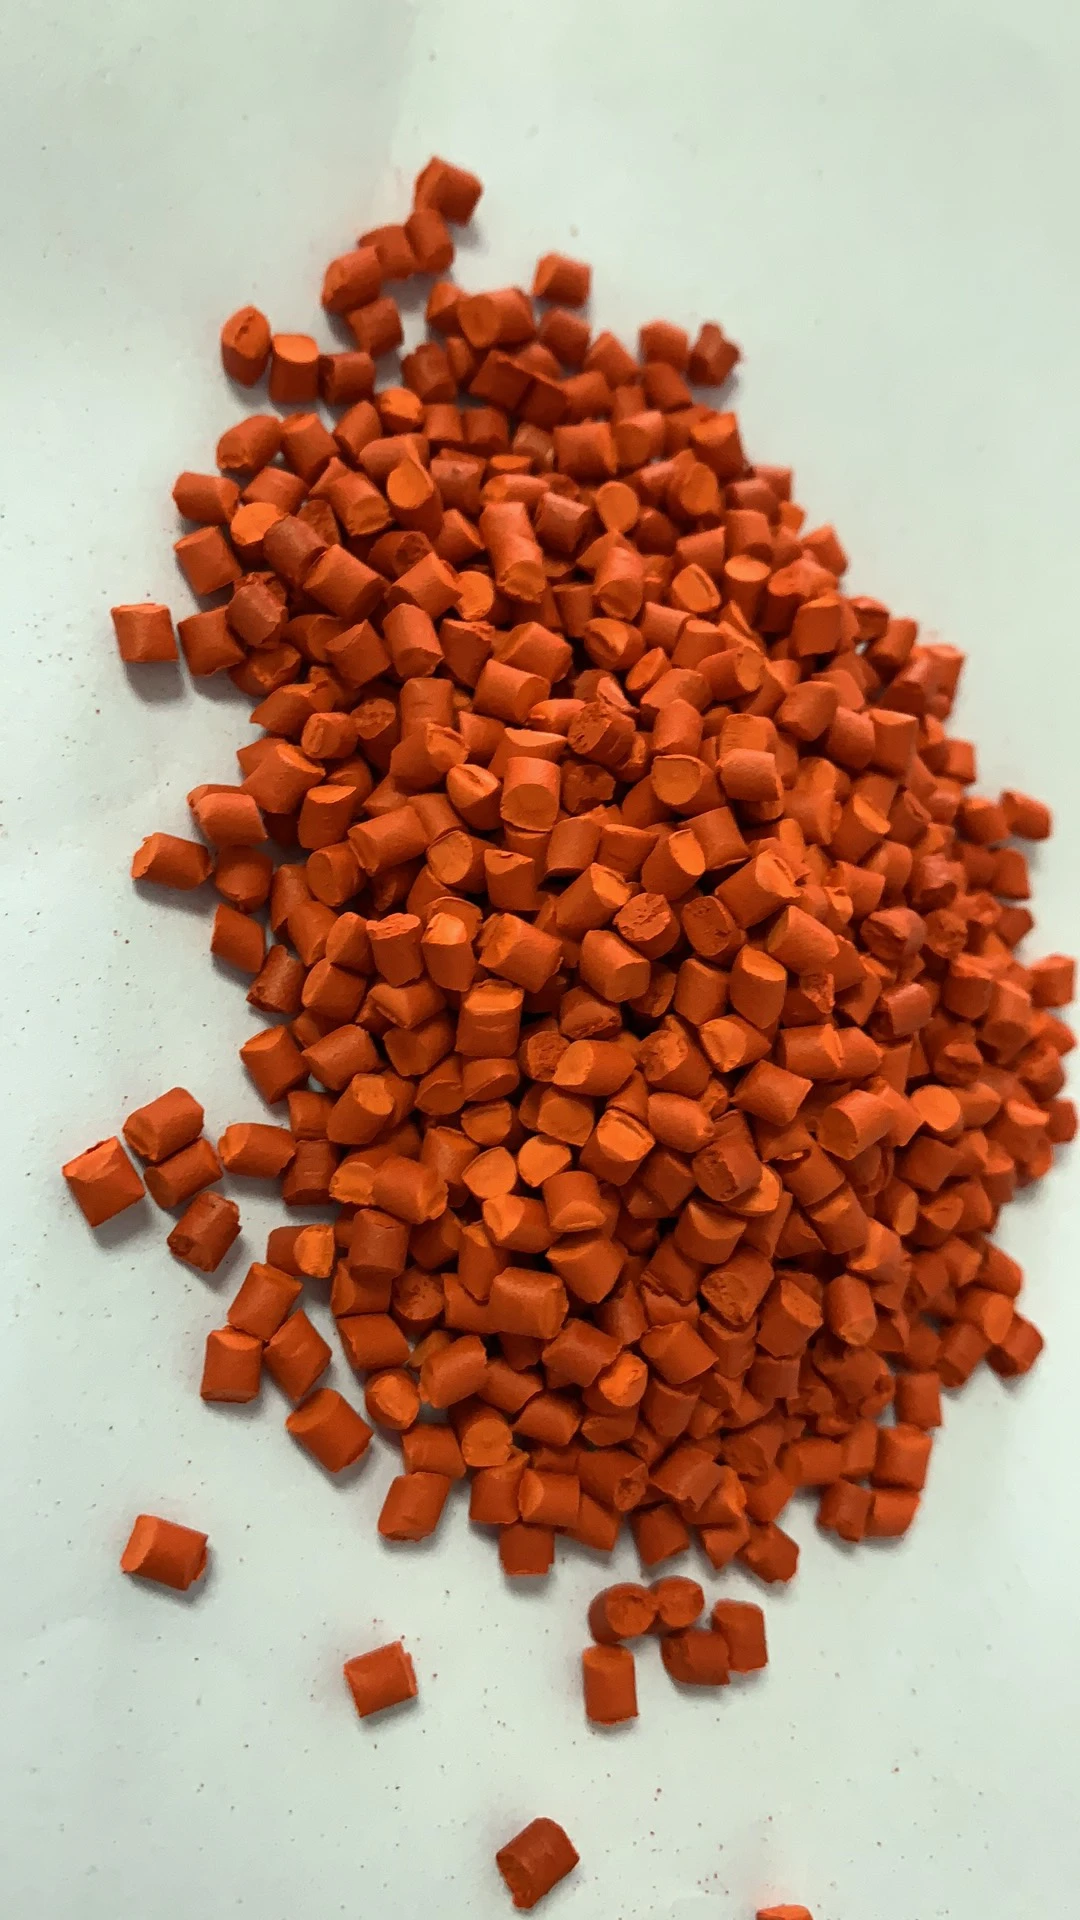 Red Masterbatch/Red Flame retardant Masterbatch/Red Master batch for plastic processing